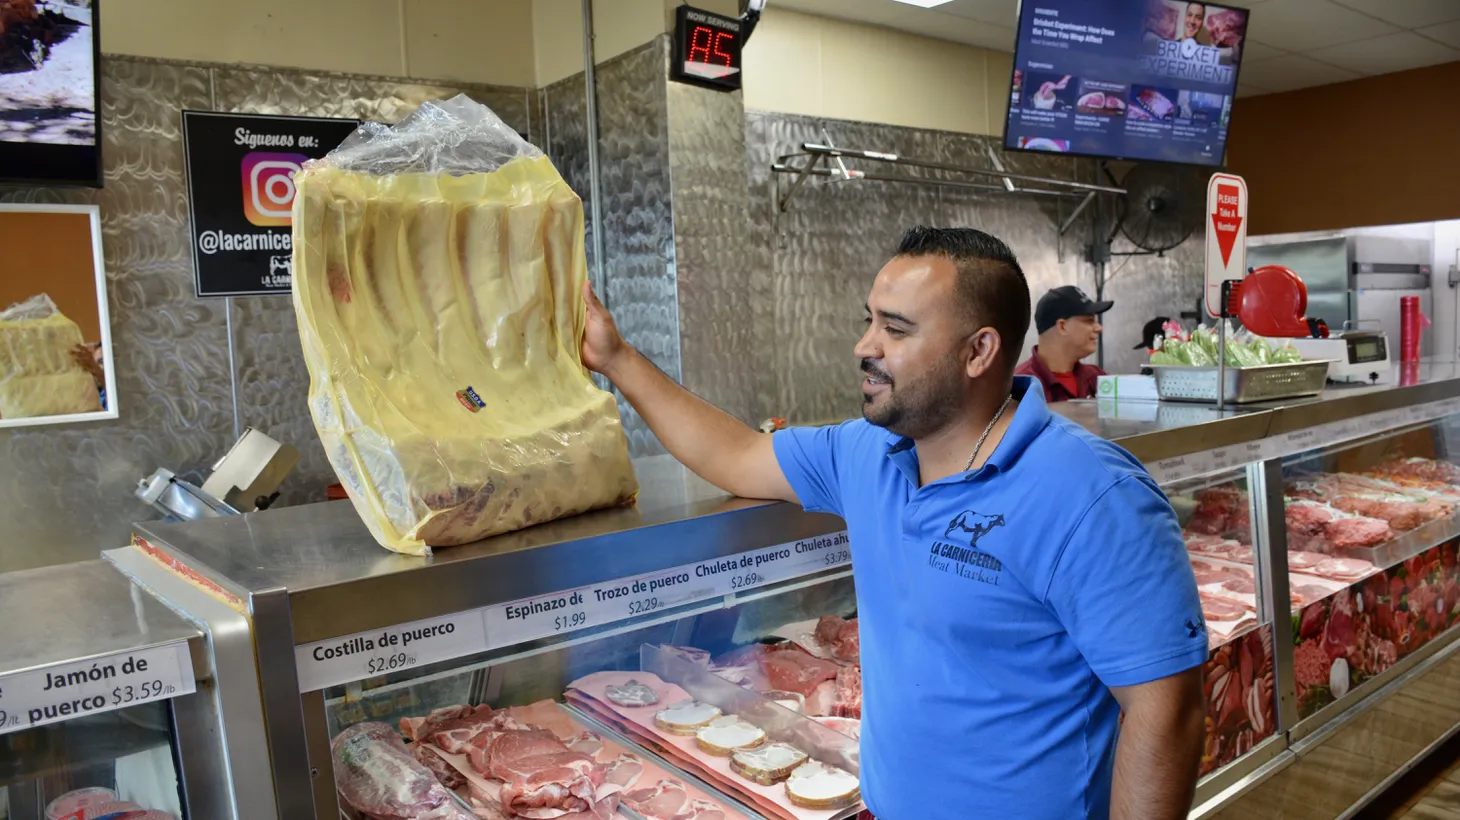 Jose Luis Ruíz owns La Carnicería Meat Market with locations in South Gate, Riverside, Pico Rivera, Bellflower, and Anaheim.